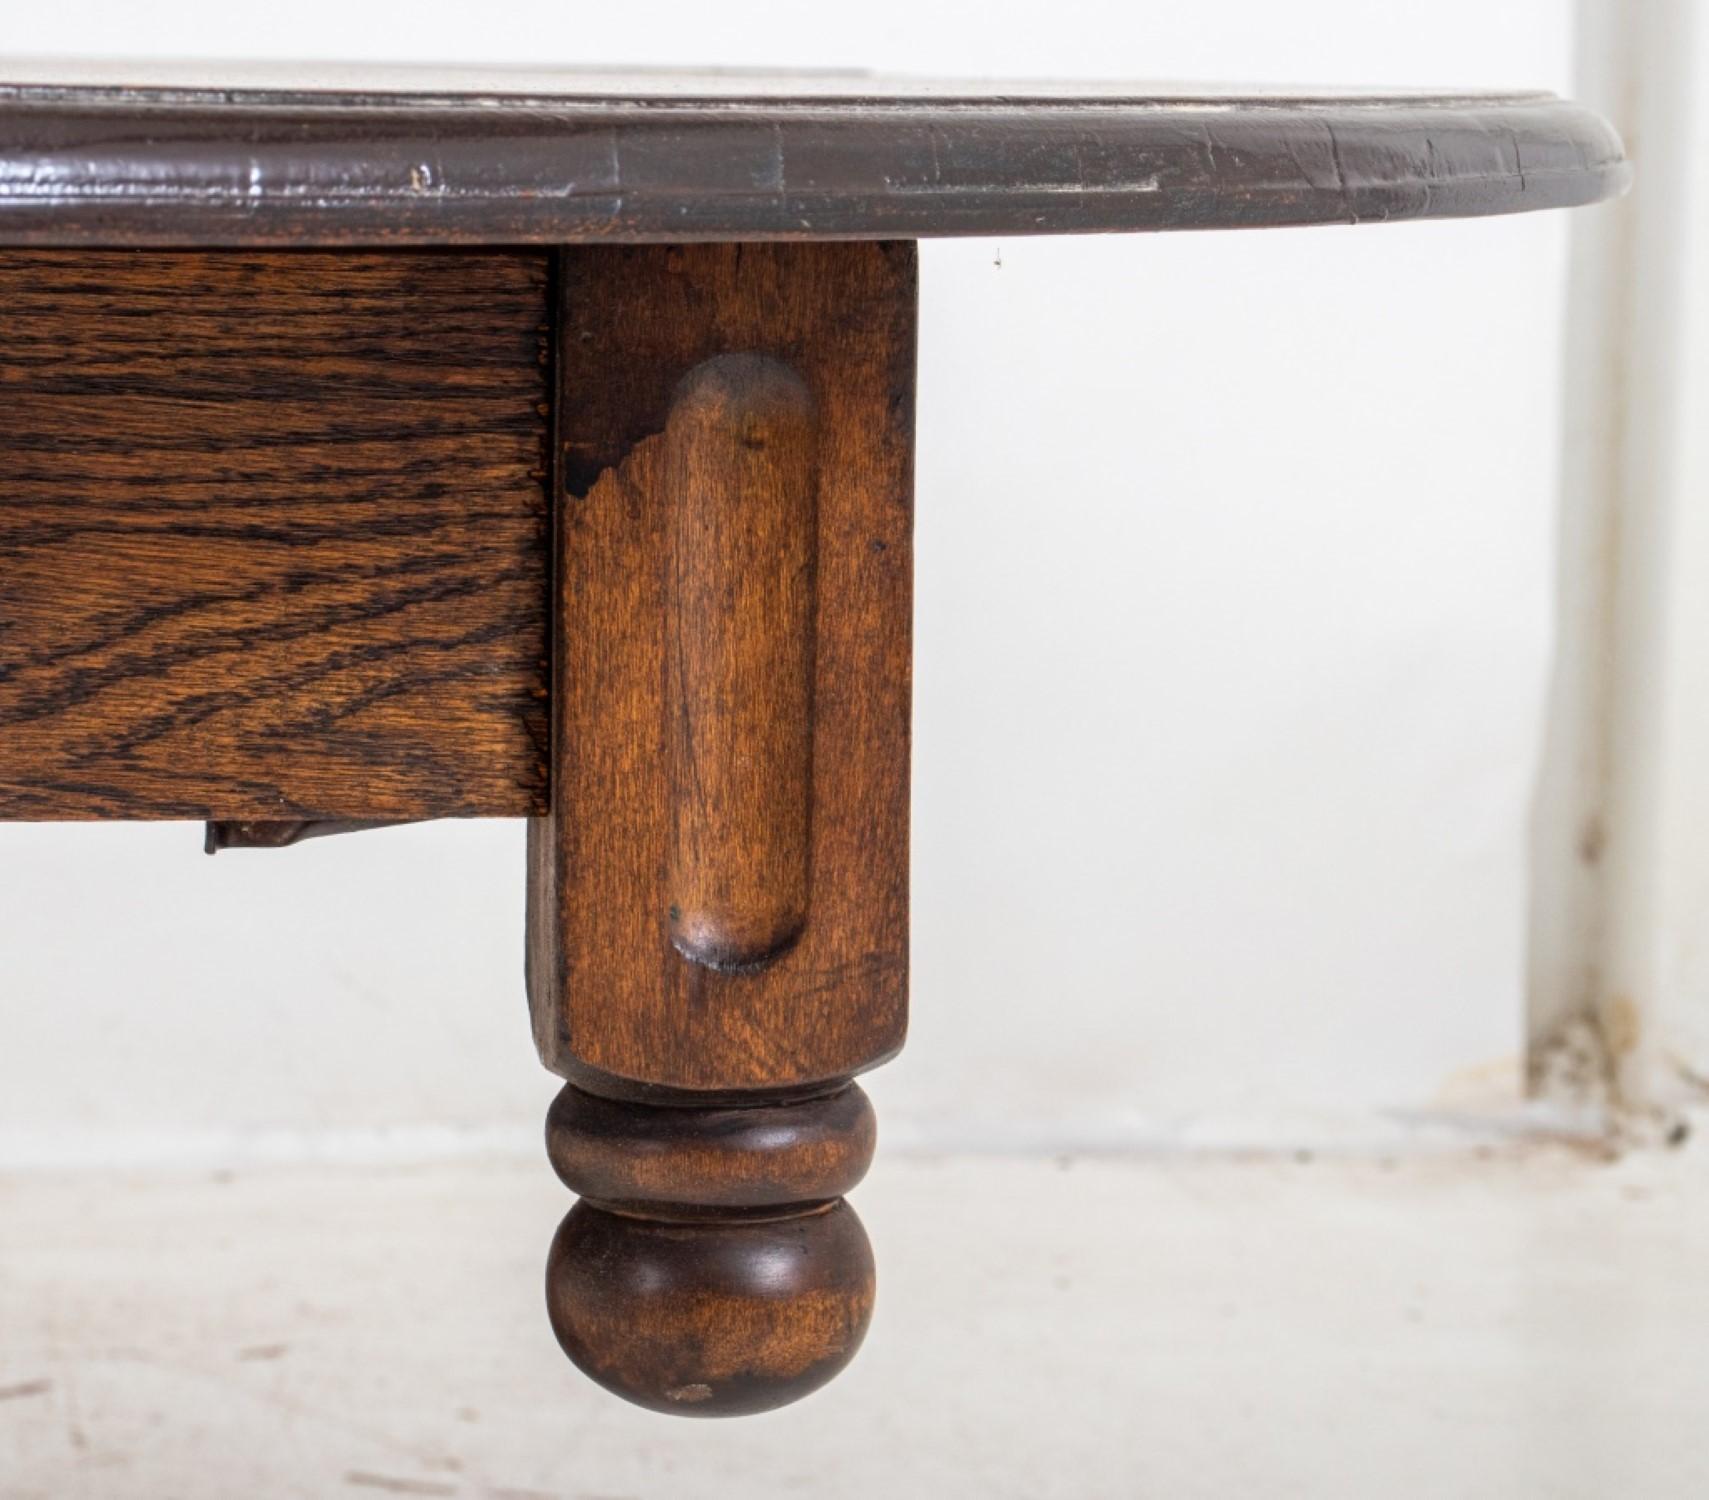 Spanish Renaissance Revival Oak Dining Table In Good Condition For Sale In New York, NY